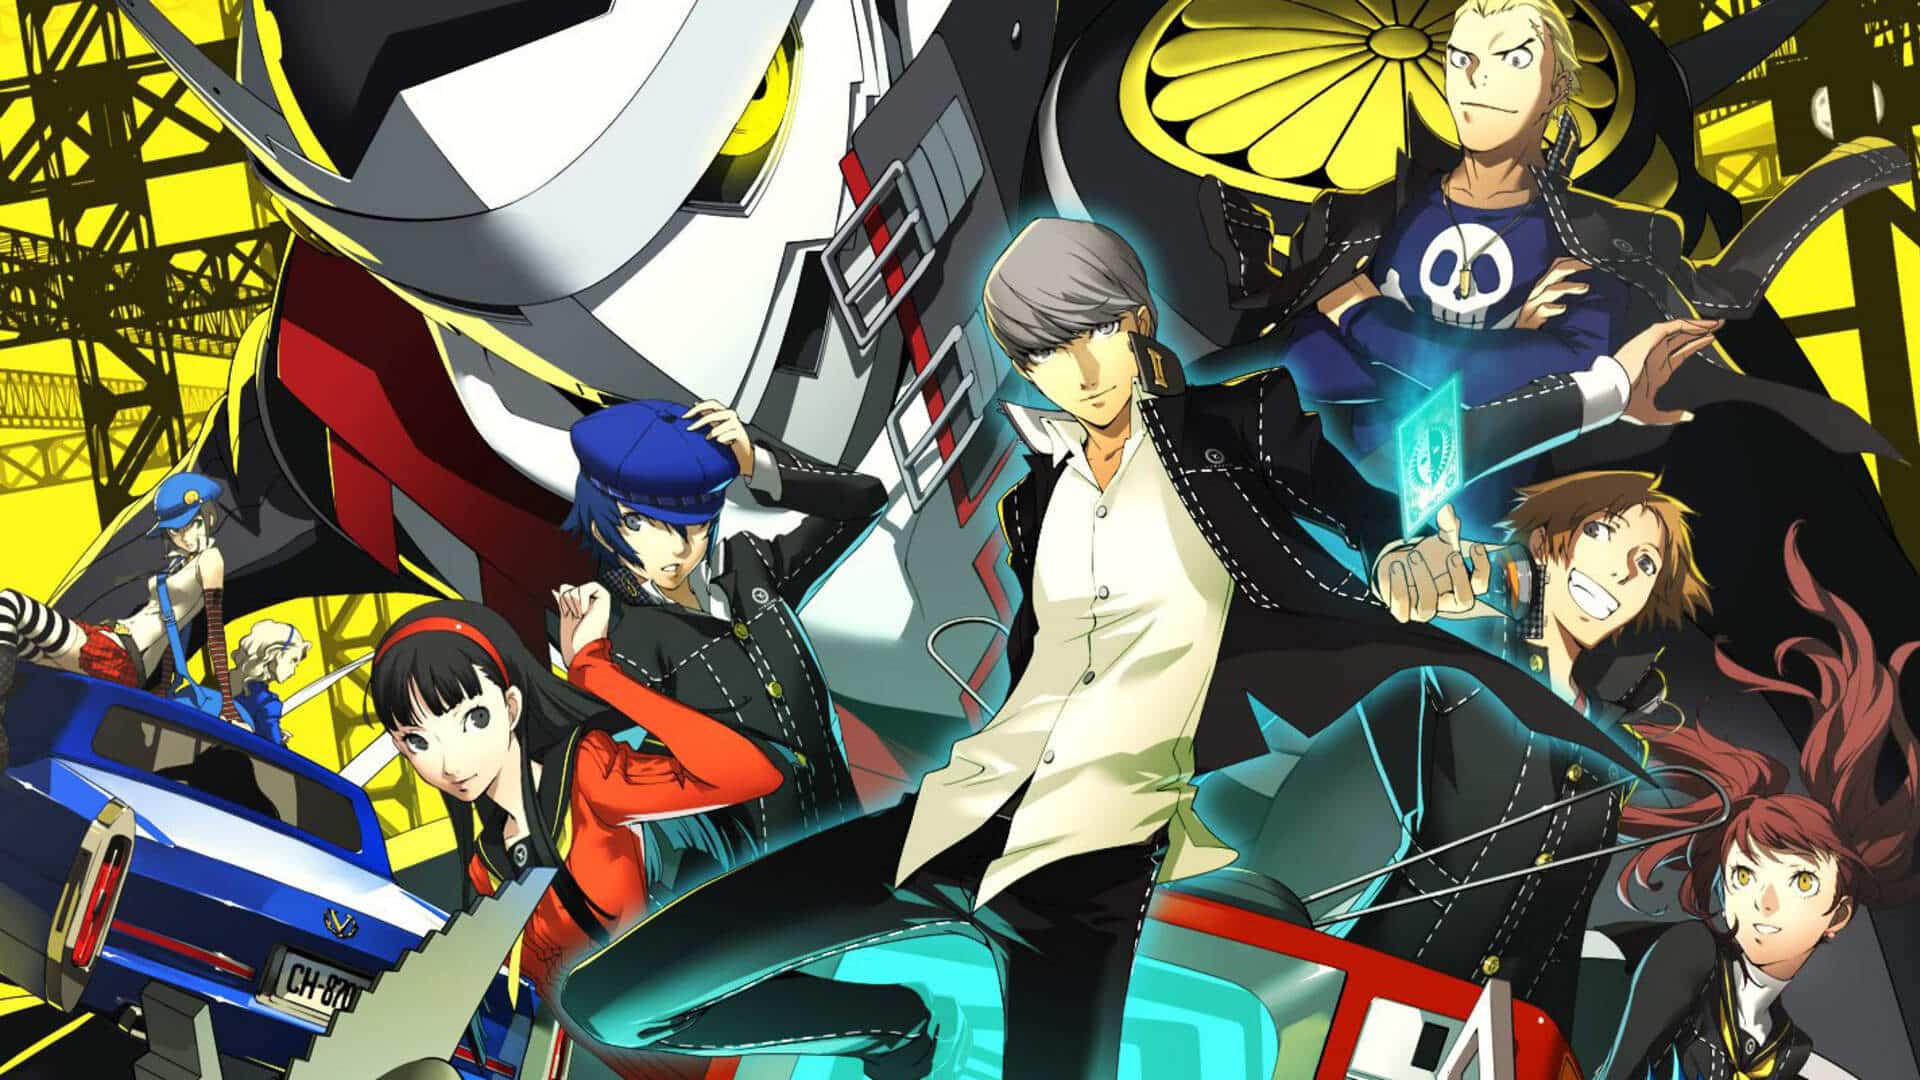 Persona 3, 4, And 5 Royal Coming To Xbox Game Pass And PC - GameSpot